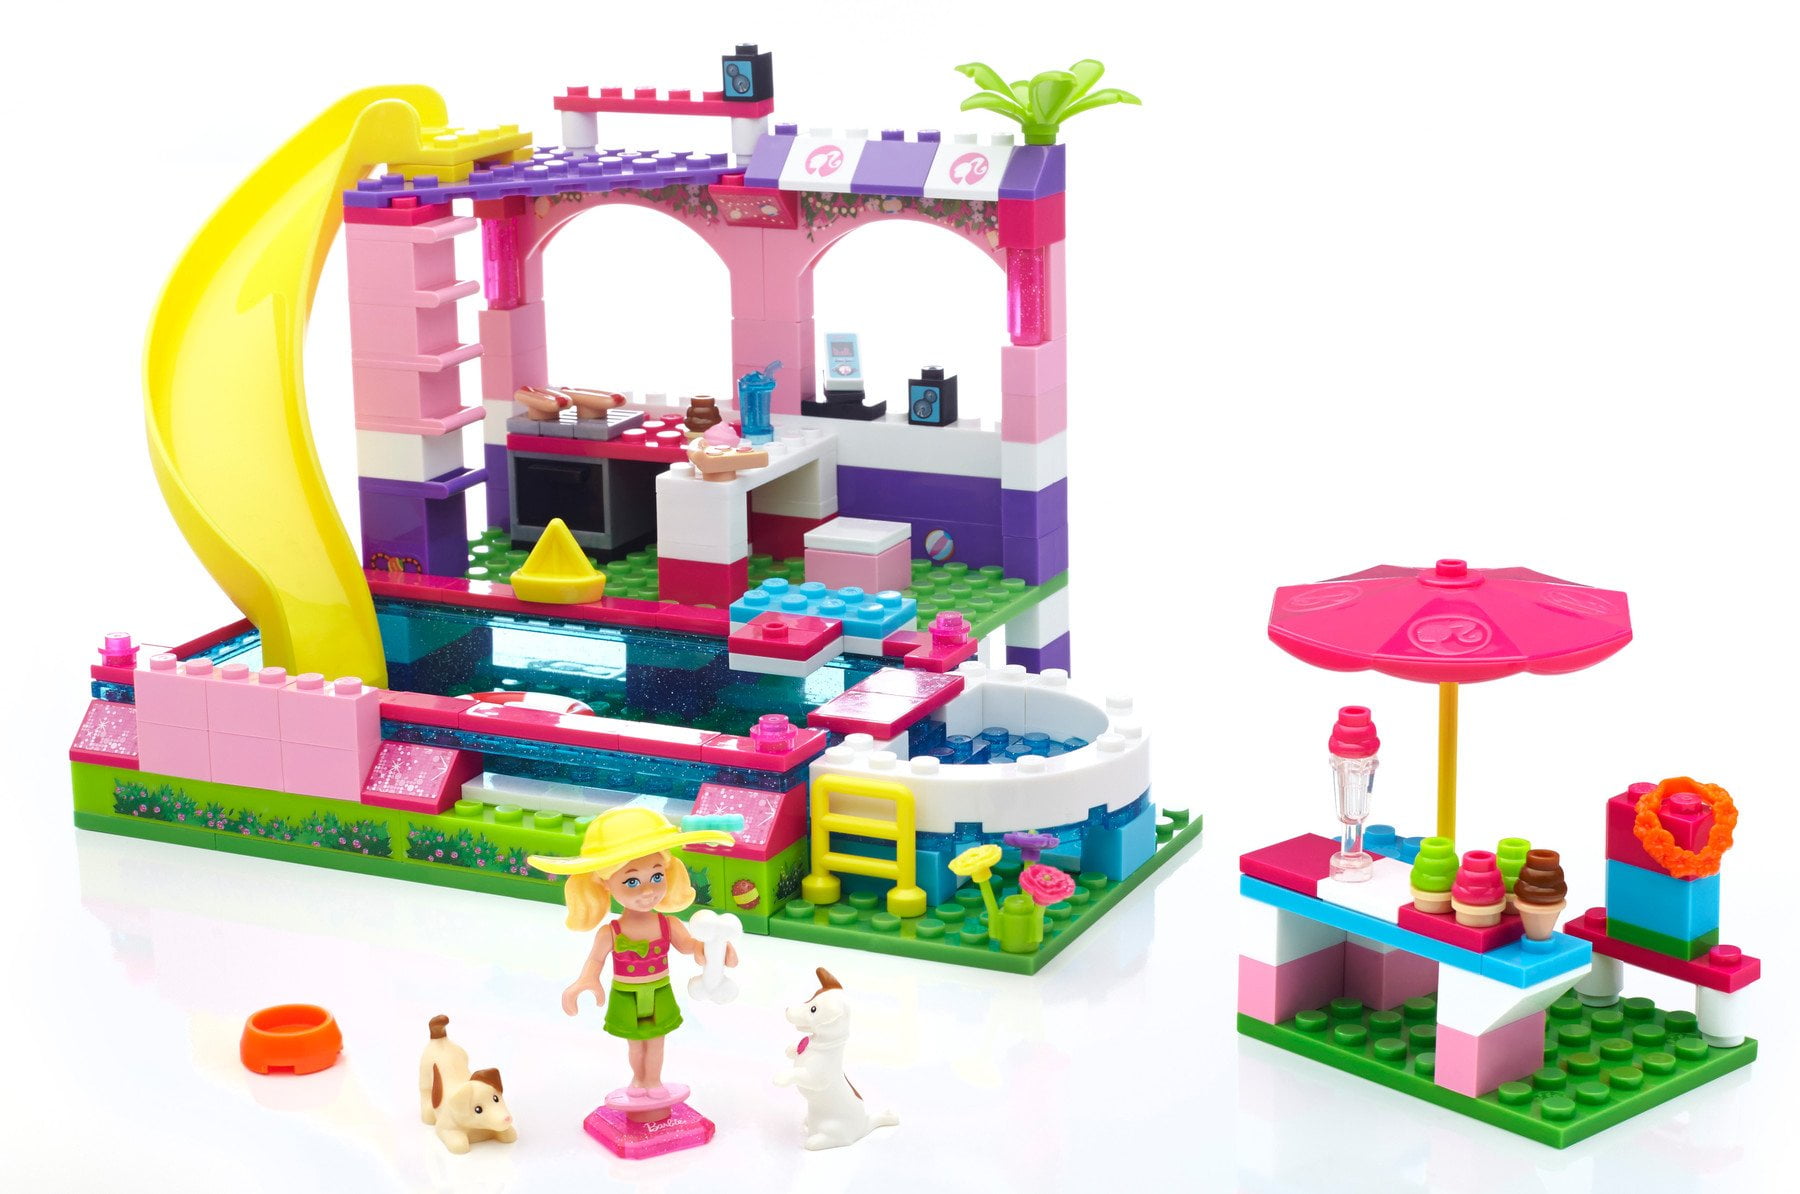 Barbie's building a challenge to lego